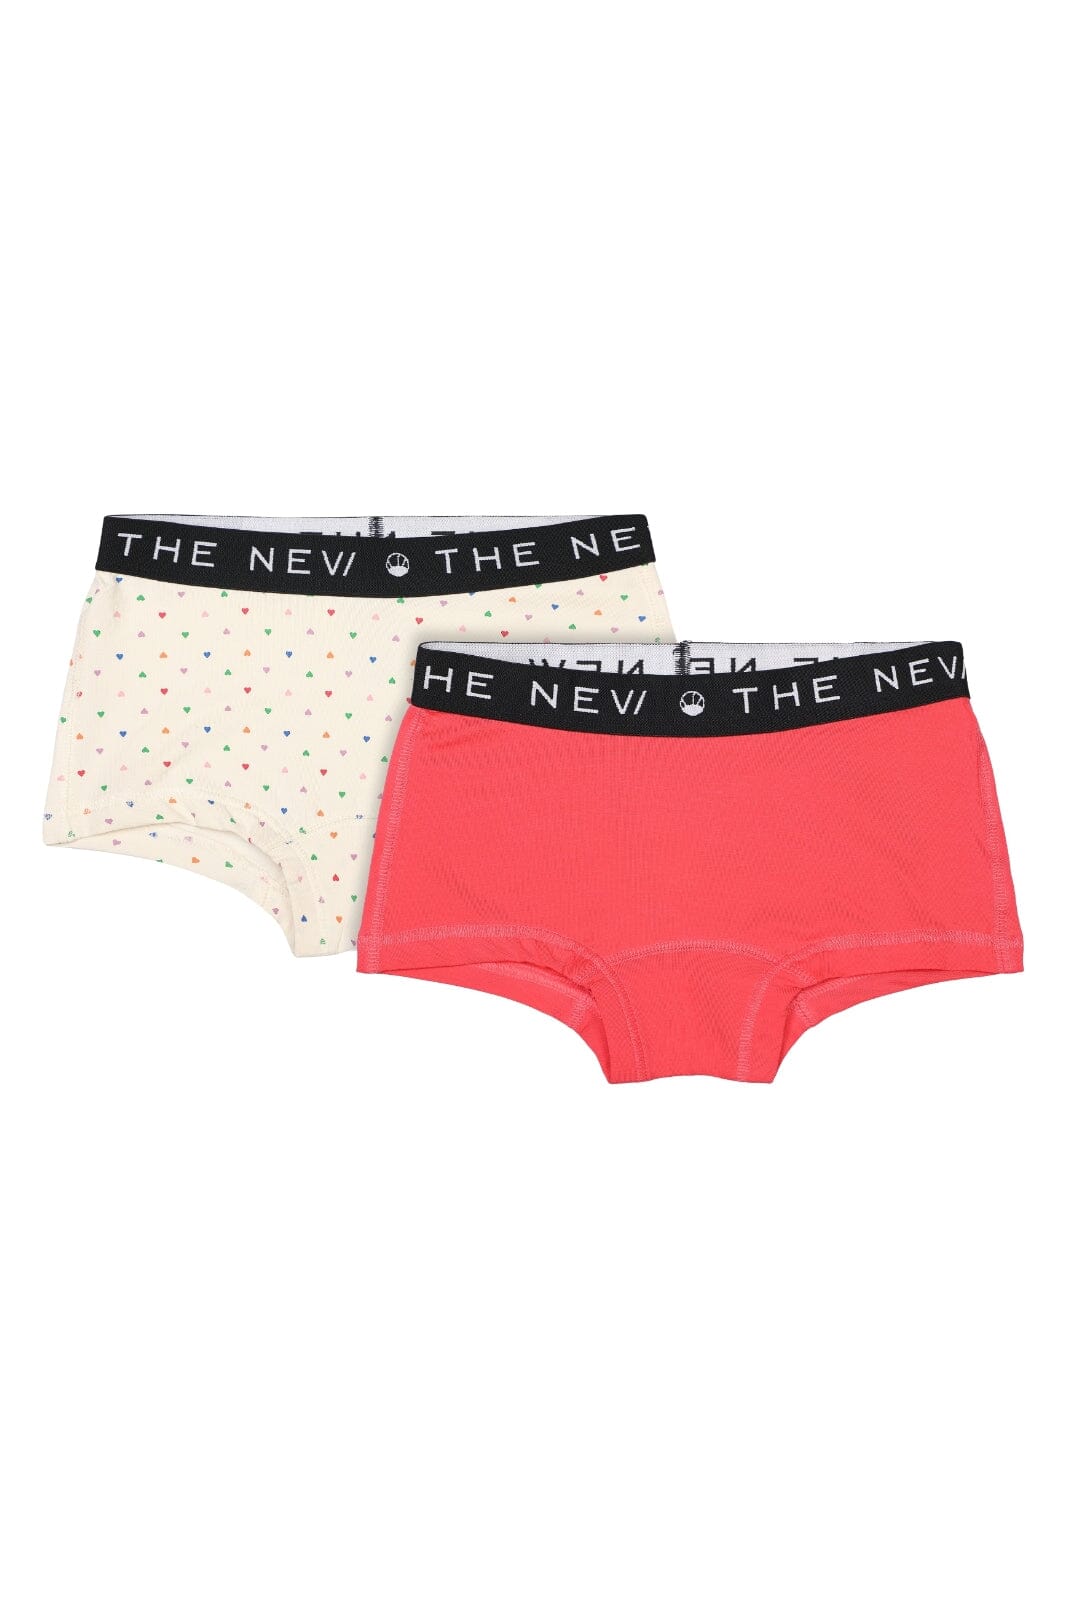 The New - The New Hipsters 2-Pack - Geranium Undertøj 